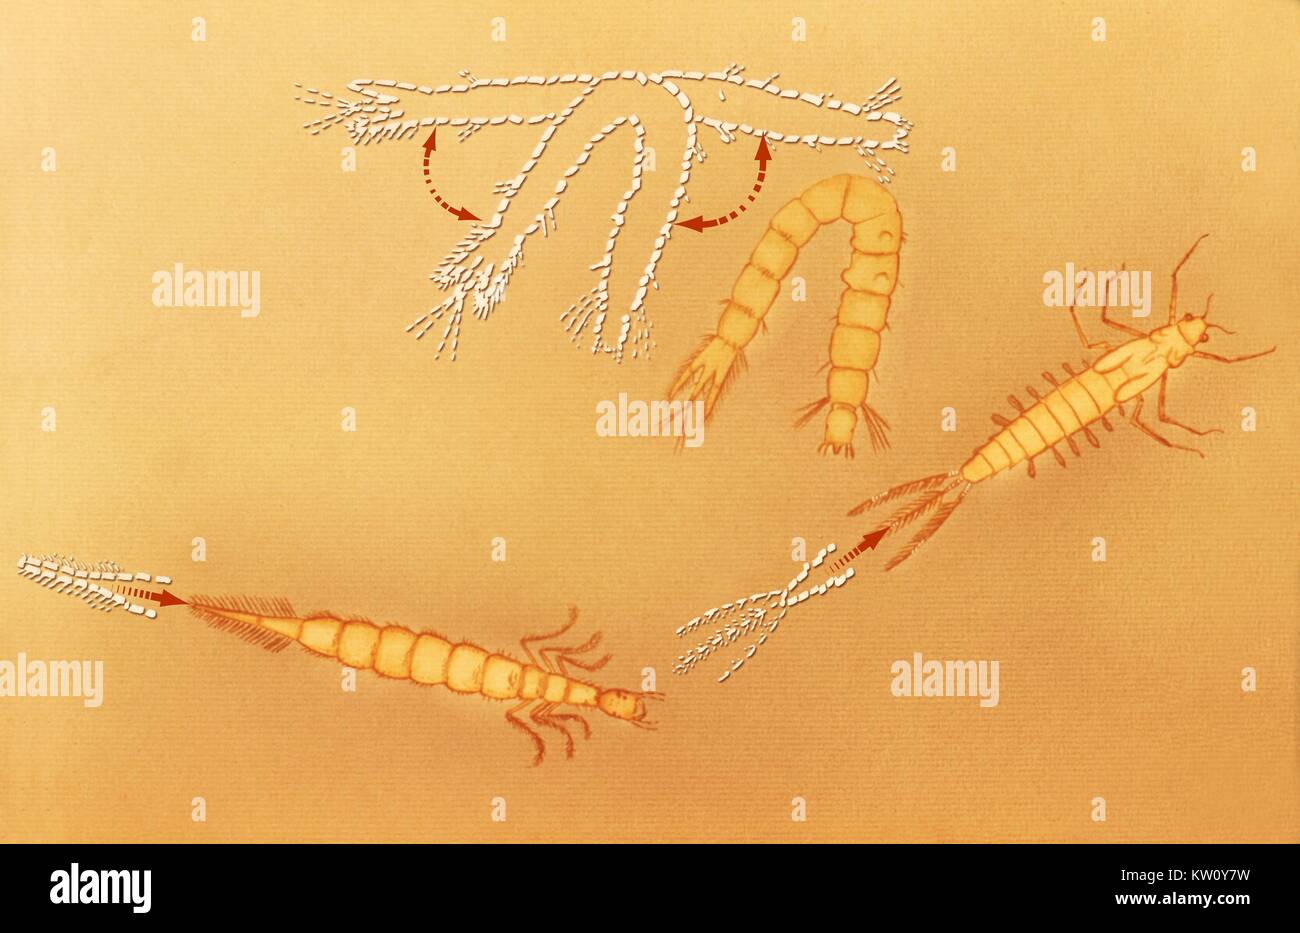 Illustration of other aquatic insect larvae illustrating different types of movement in their aqueous environment. Mosquito larvae are not propelled by appendages, as are the aquatic insects shown, nor do they move with rhythmic, undulating motions characteristic of many aquatic insect larvae. Image courtesy CDC, 1975. Stock Photo